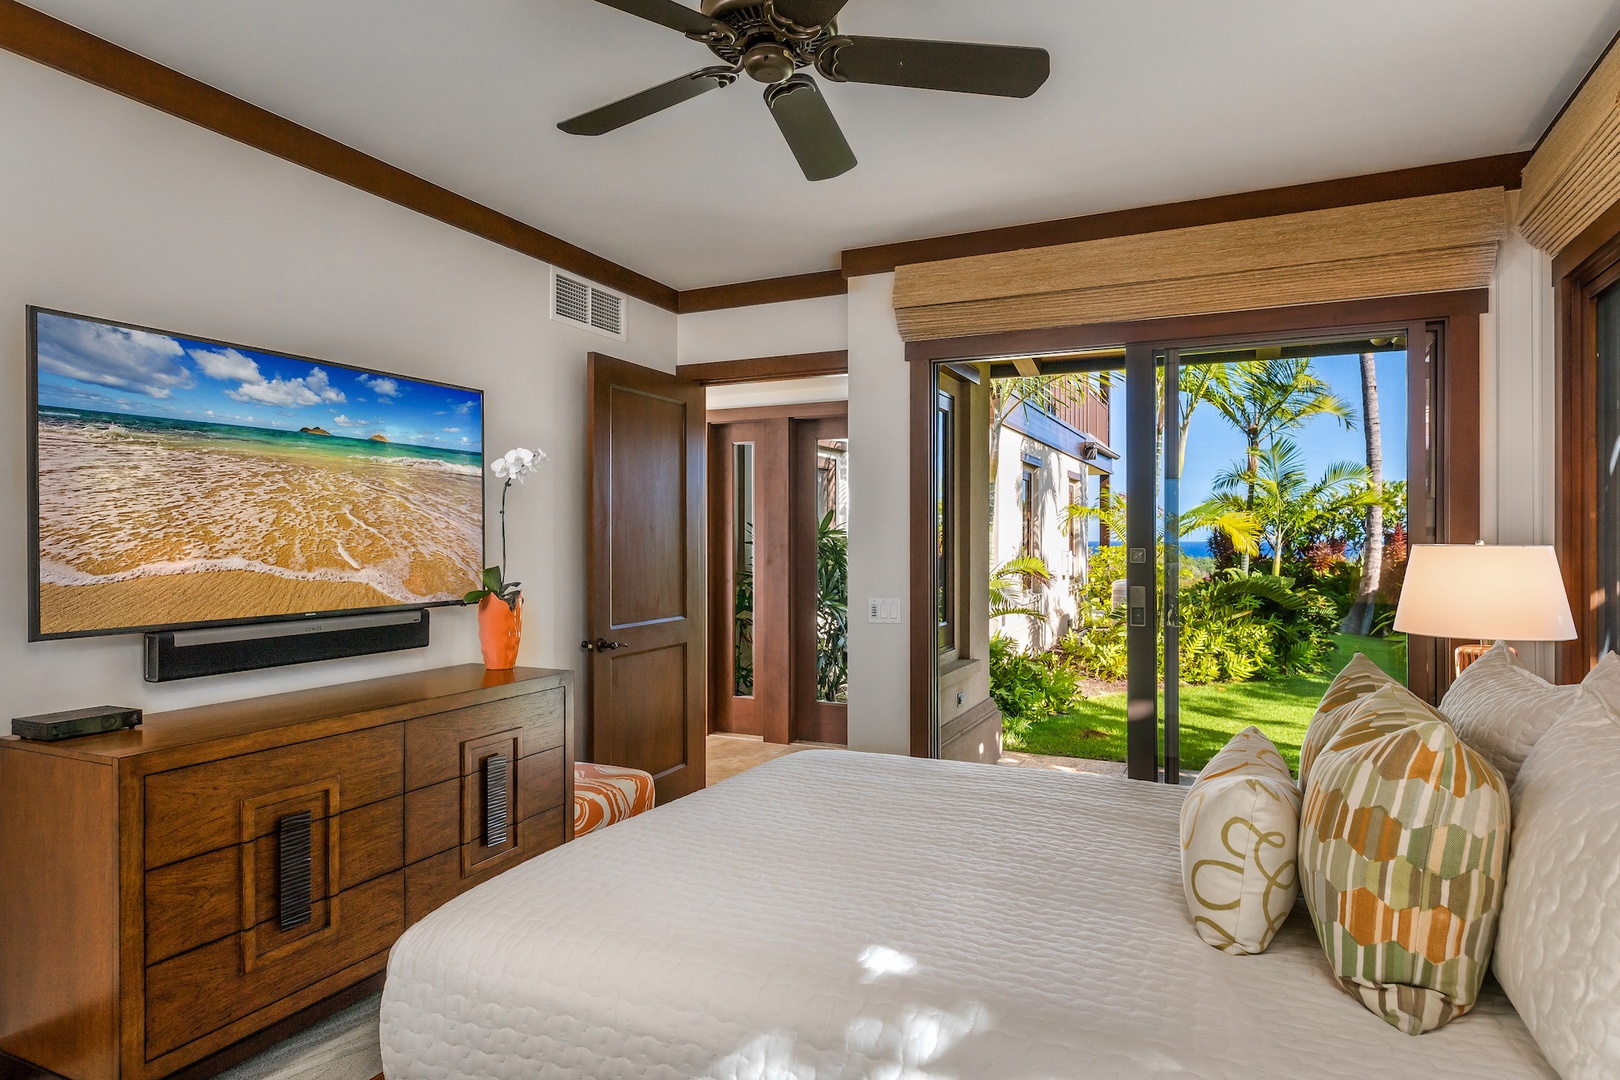 Kailua Kona Vacation Rentals, 2BD Hali'ipua Villa (108) at Four Seasons Resort at Hualalai - Second bedroom with queen-sized bed, 65" flat-screen TV, ensuite bath and sliding doors to a private furnished lanai.